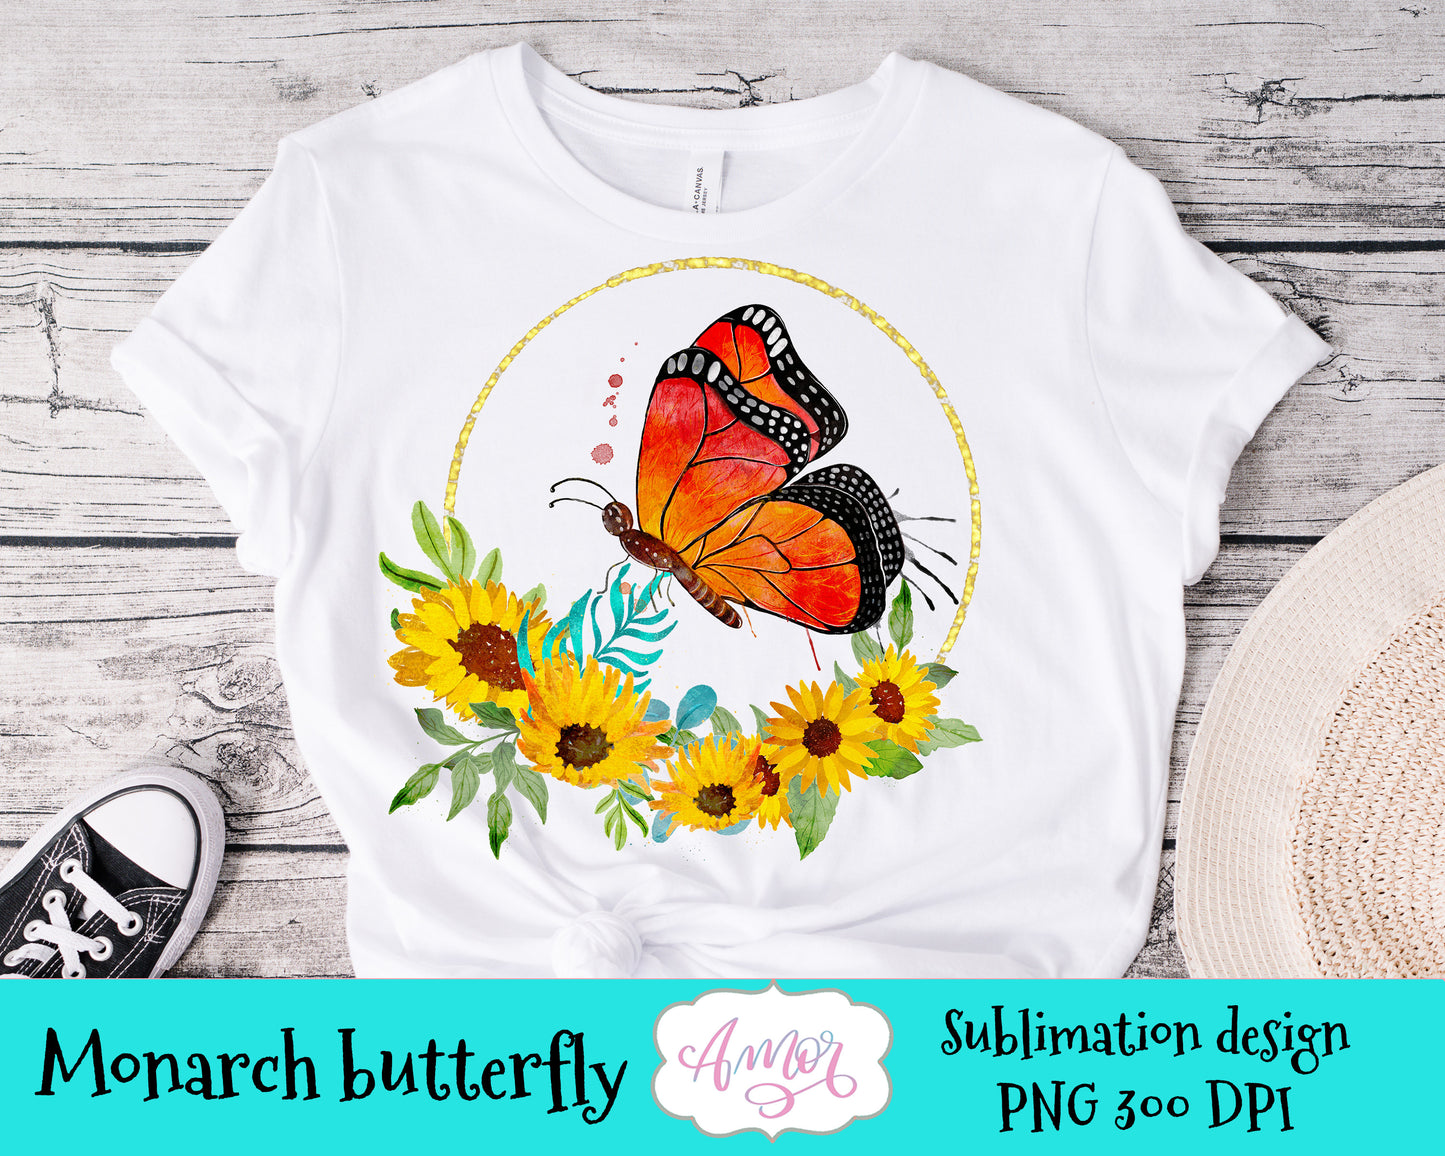 Butterfly PNG sublimation design for T-shirts